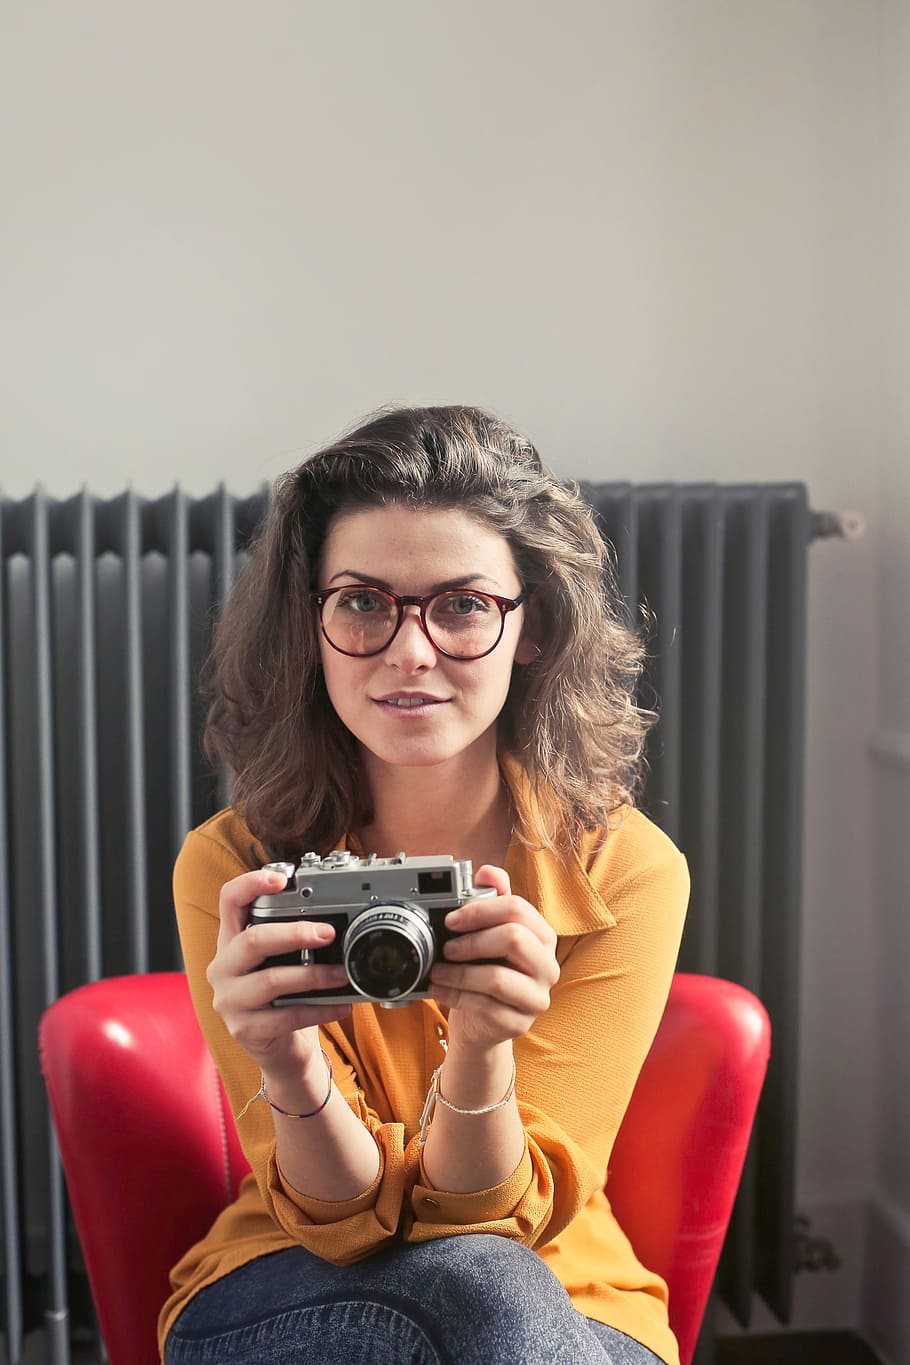 Young Woman Wearing Yellow Collared Shirt And Jeans With Spectacles Holding A Camera While Sitting at Red Chair